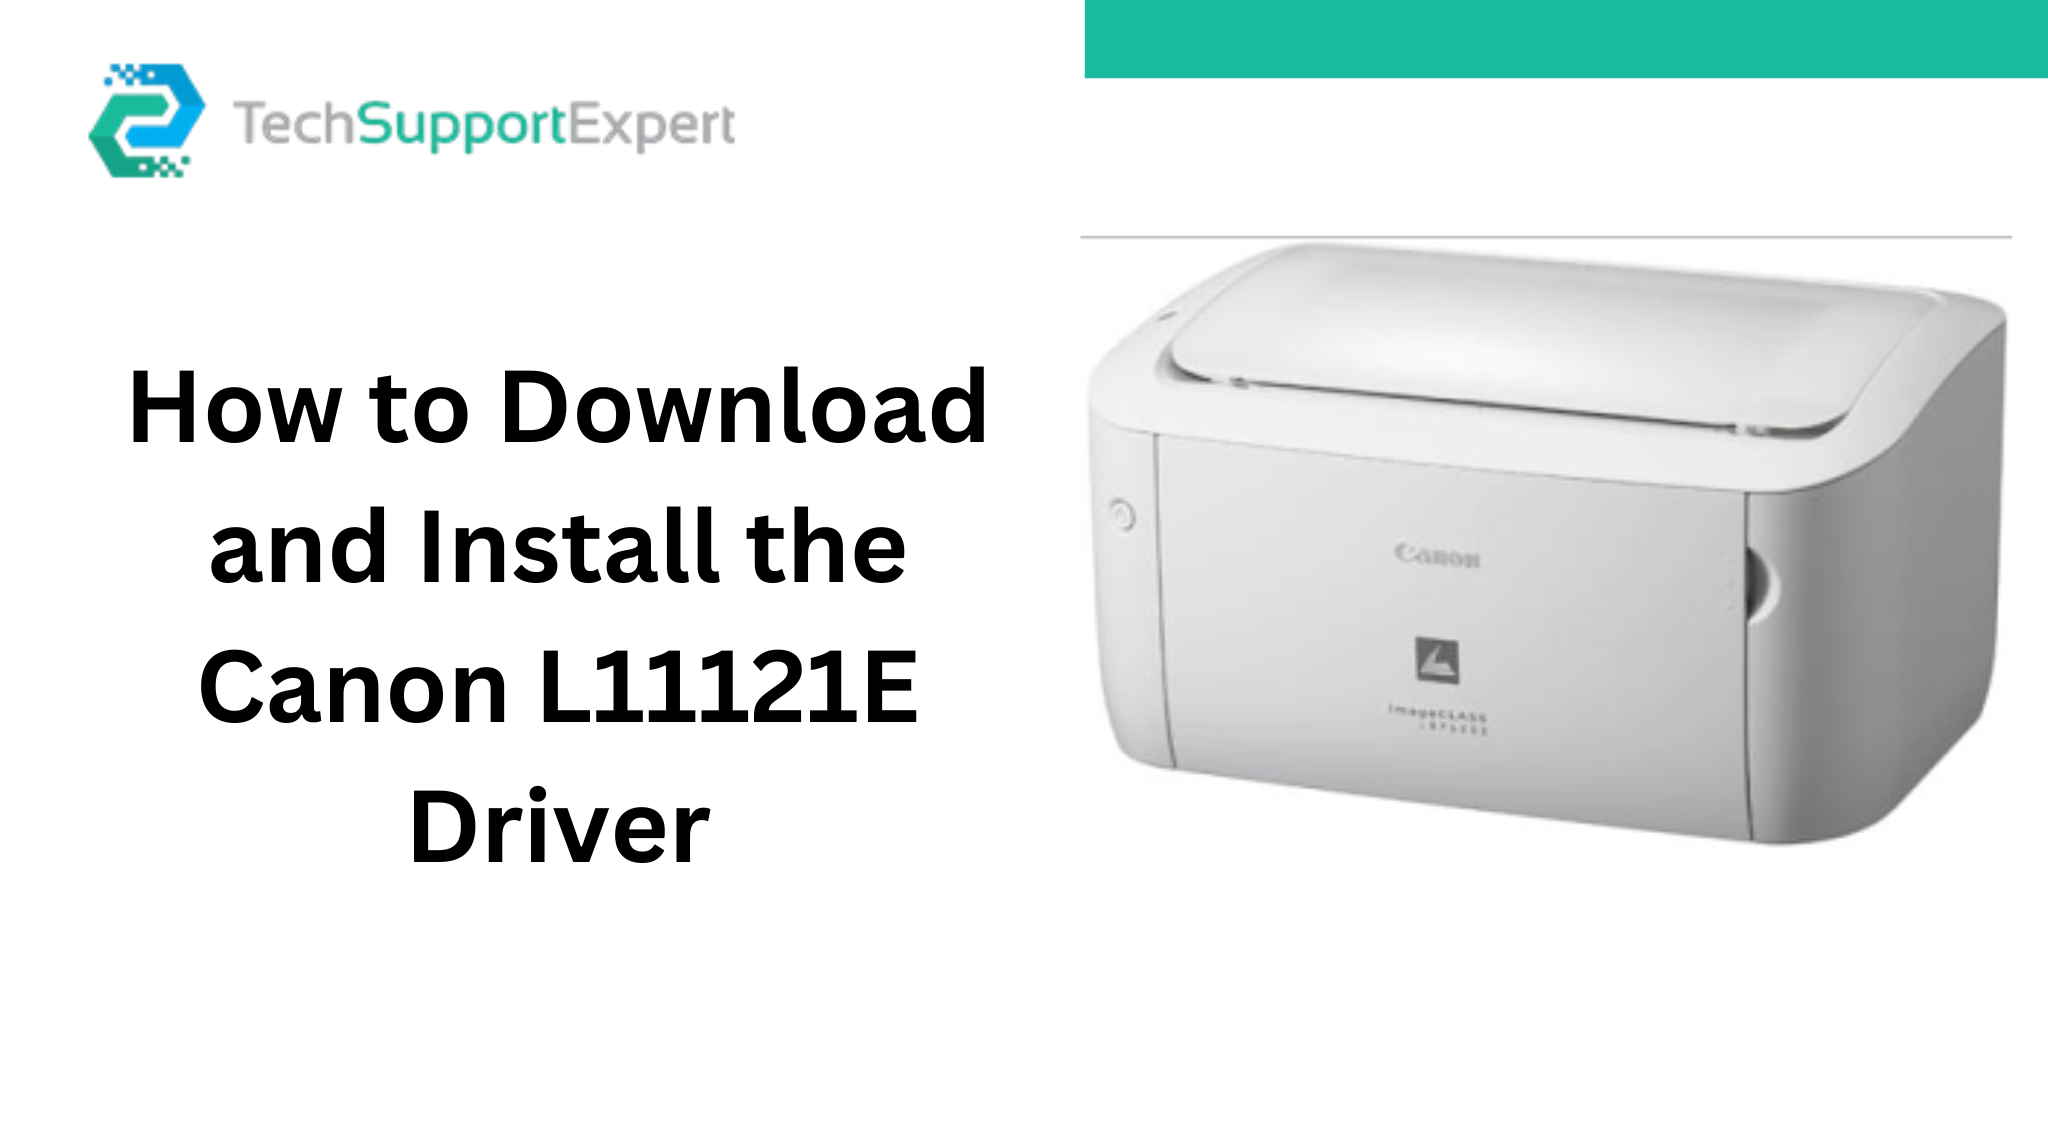 How to Download and Install the Canon L11121E Driver